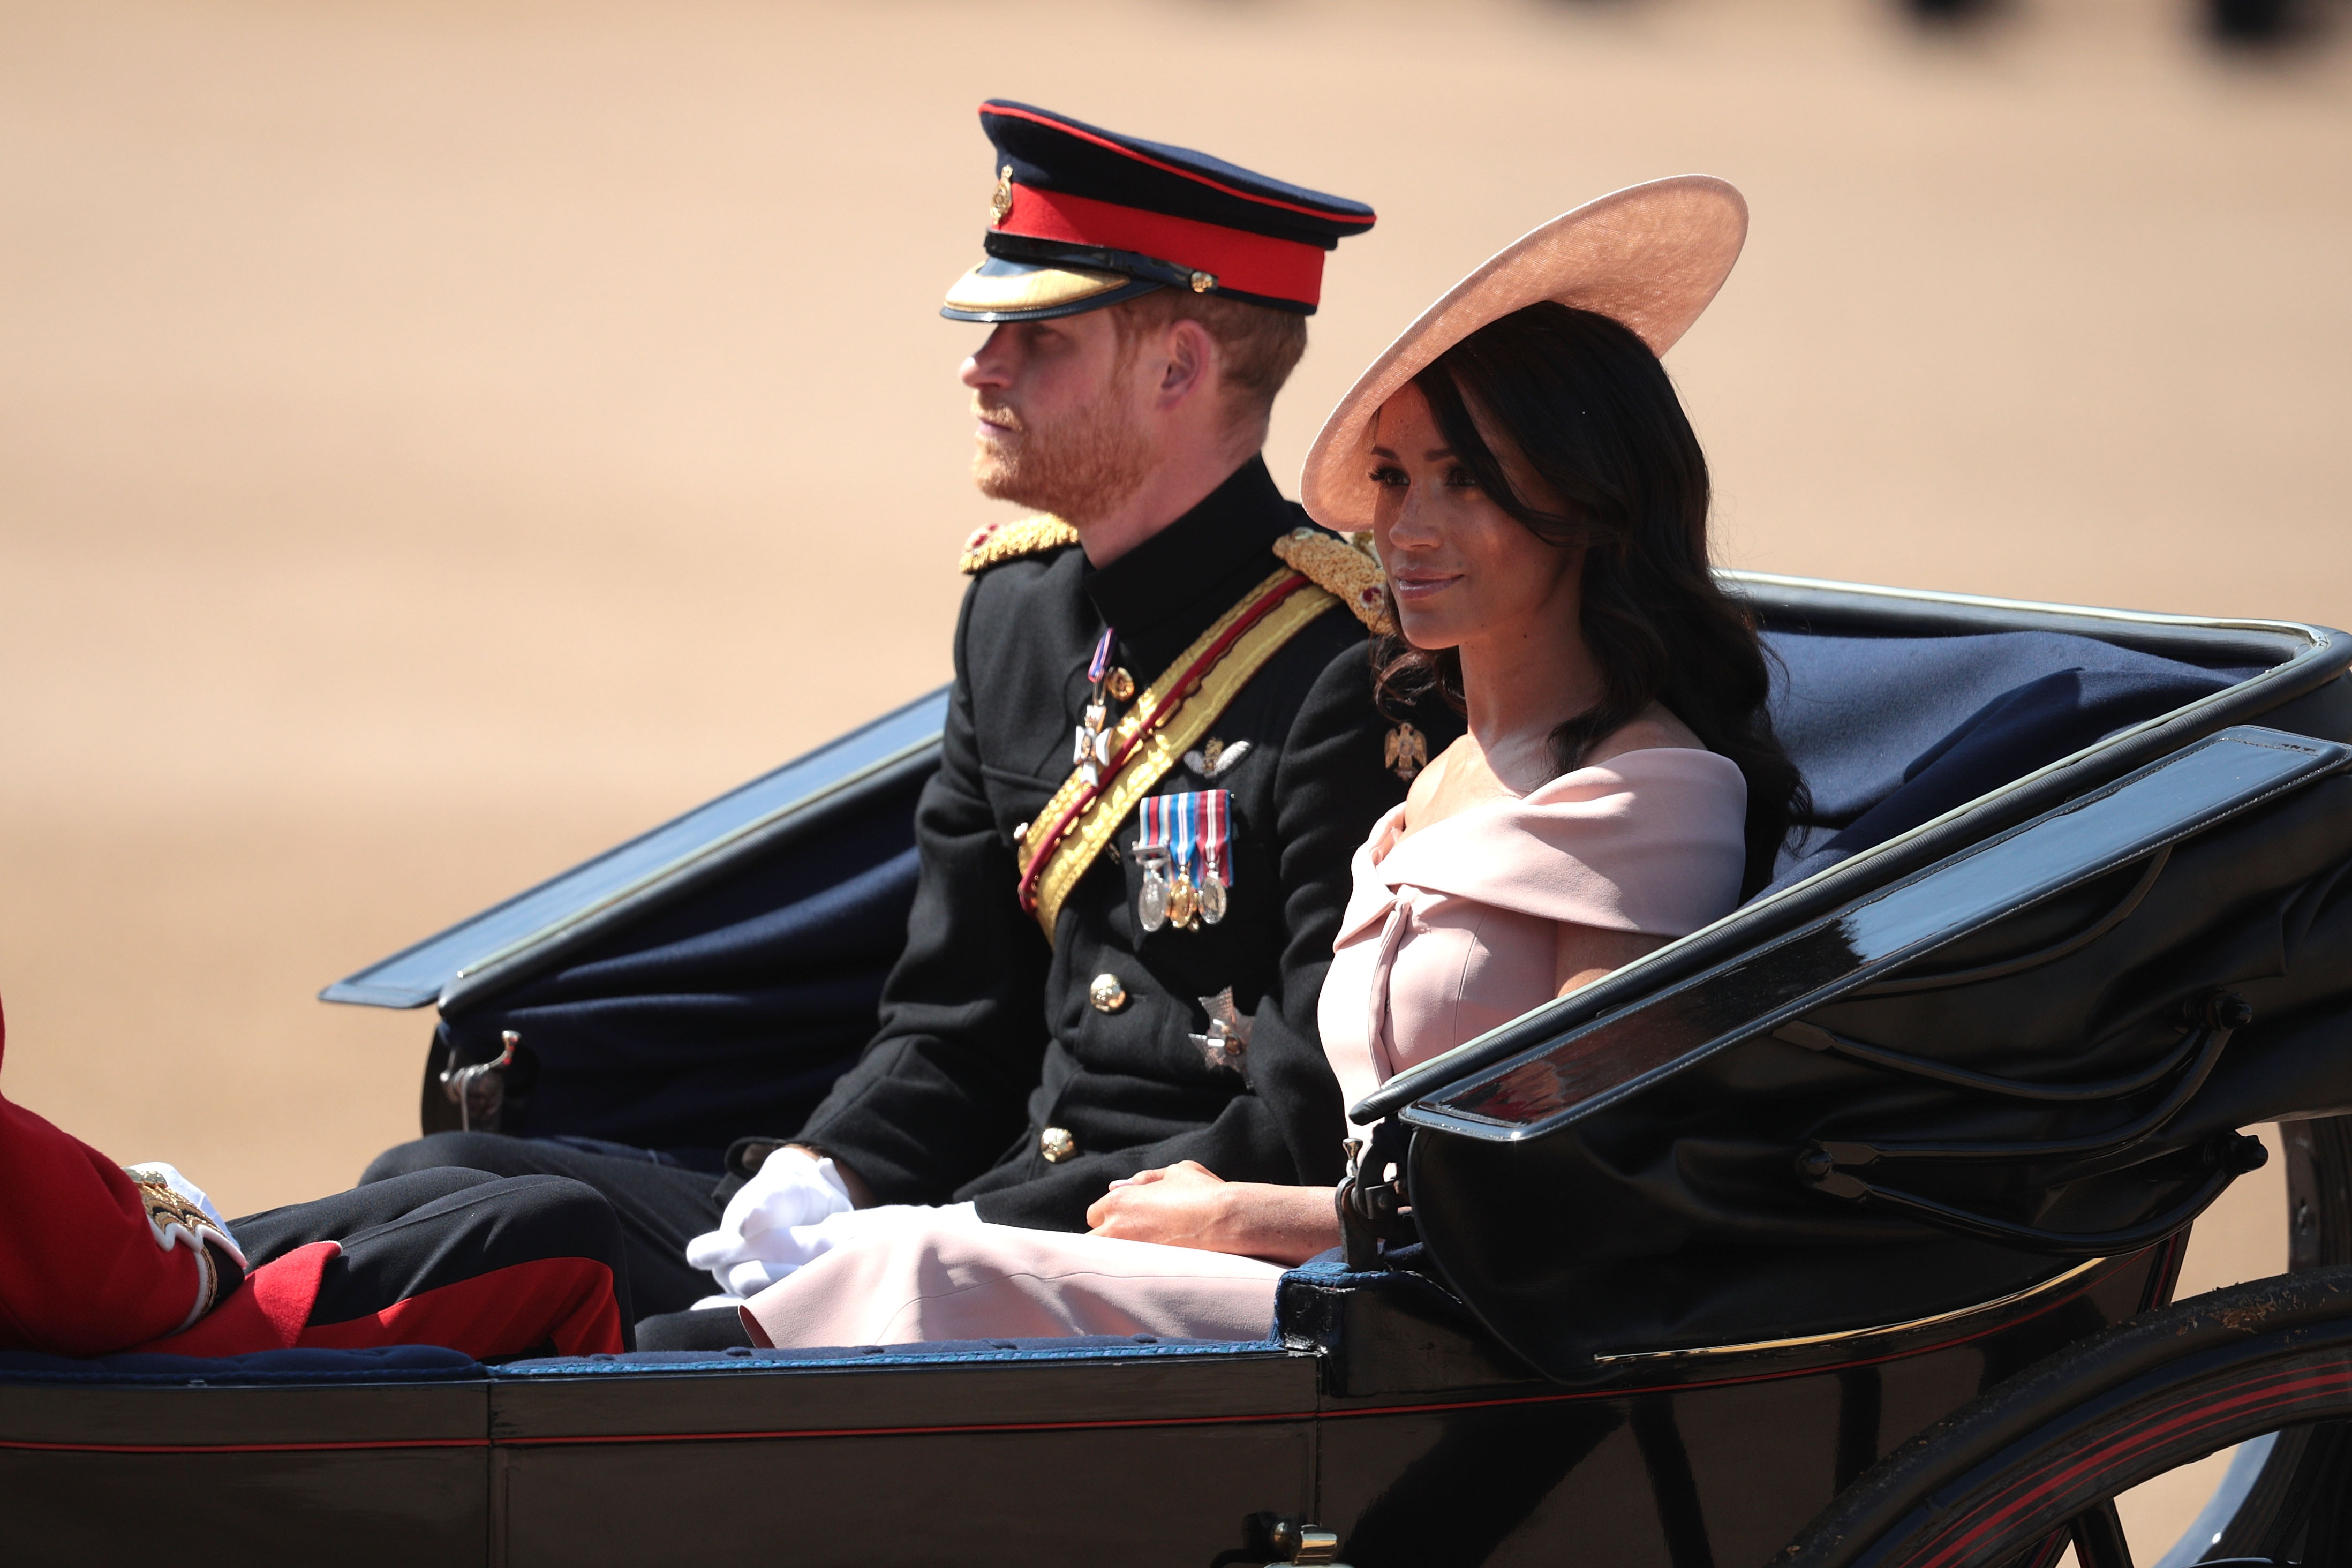 Prince Harry, Duke of Sussex, and Meghan Markle, Duchess of Sussex, arrive at The Royal Horseguards during Trooping the Colour ceremony on June 9, 2018 in London, England (Dan Kitwood—Getty Images)